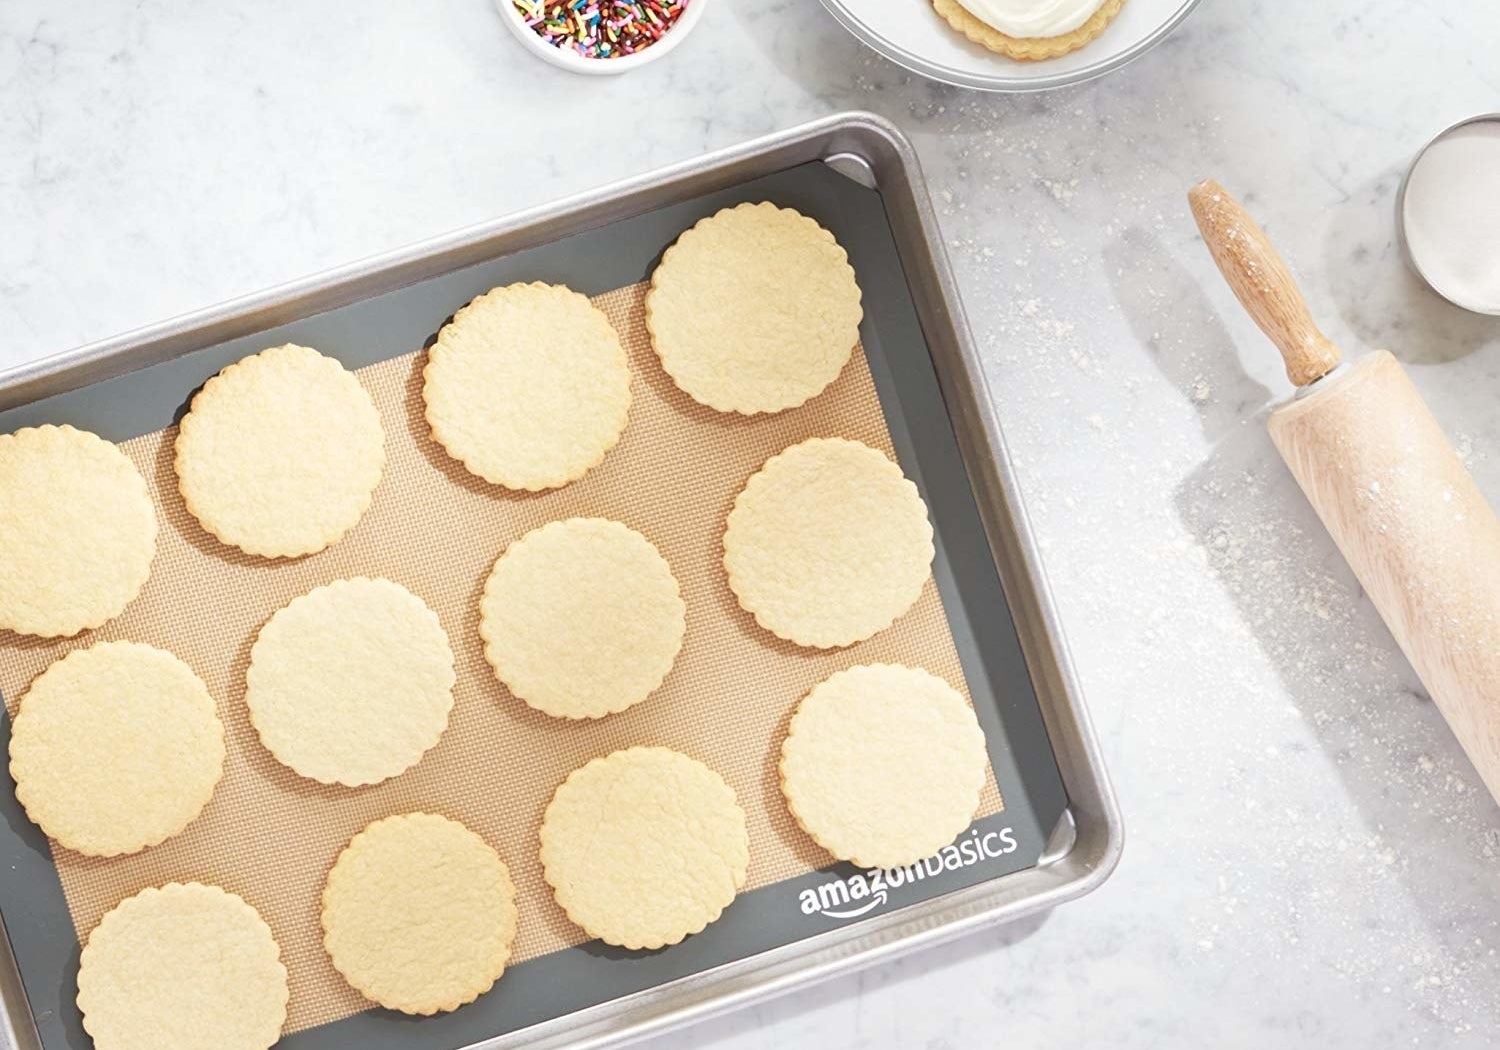 Cookies on a silicone baking mat